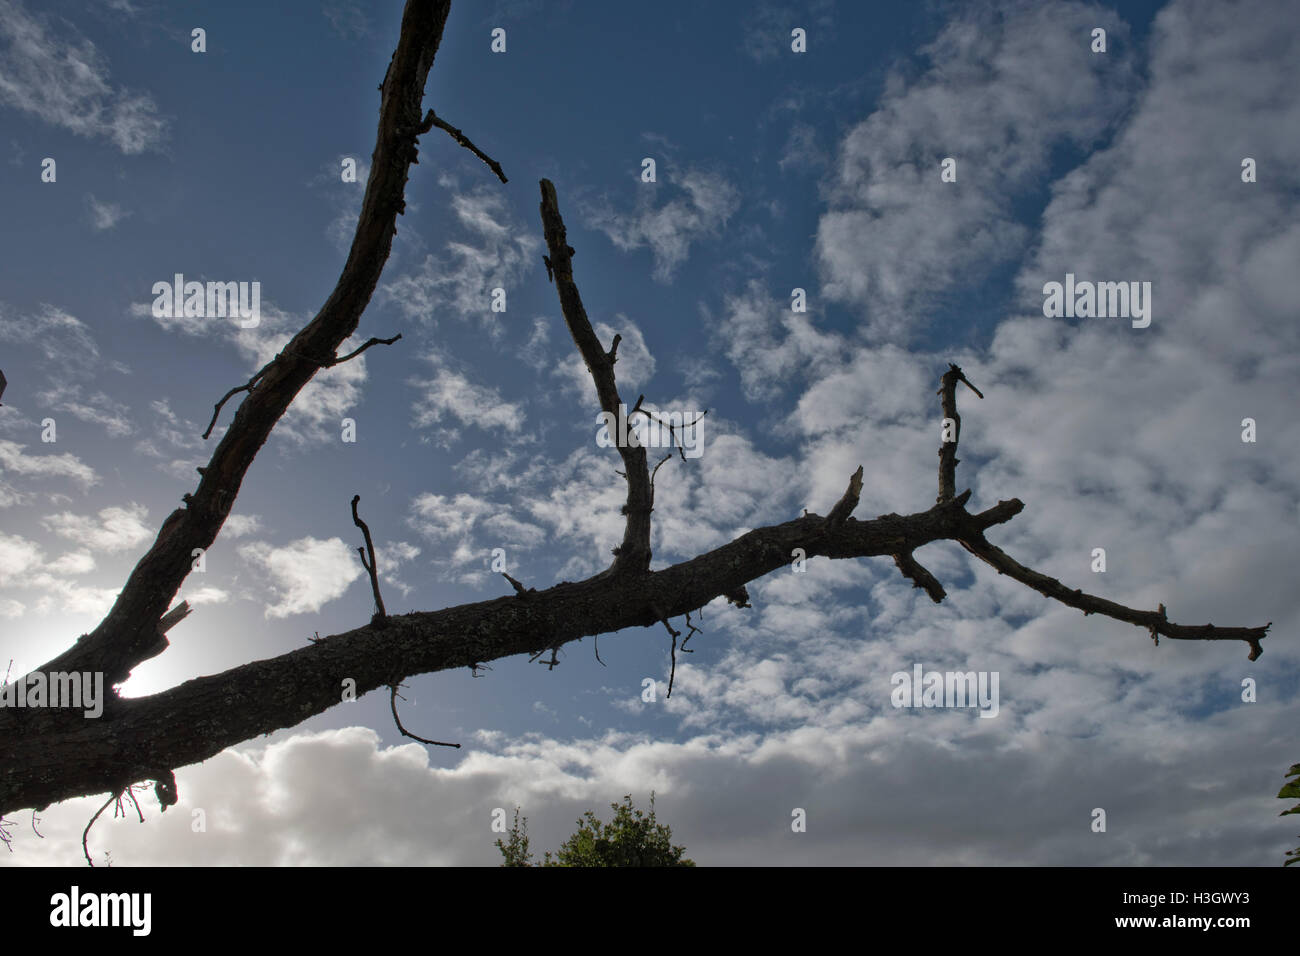 Silhouette of a fallen branch on an old oak tree, sun behind with blue sky and light fluffy clouds, Berkshire, October Stock Photo